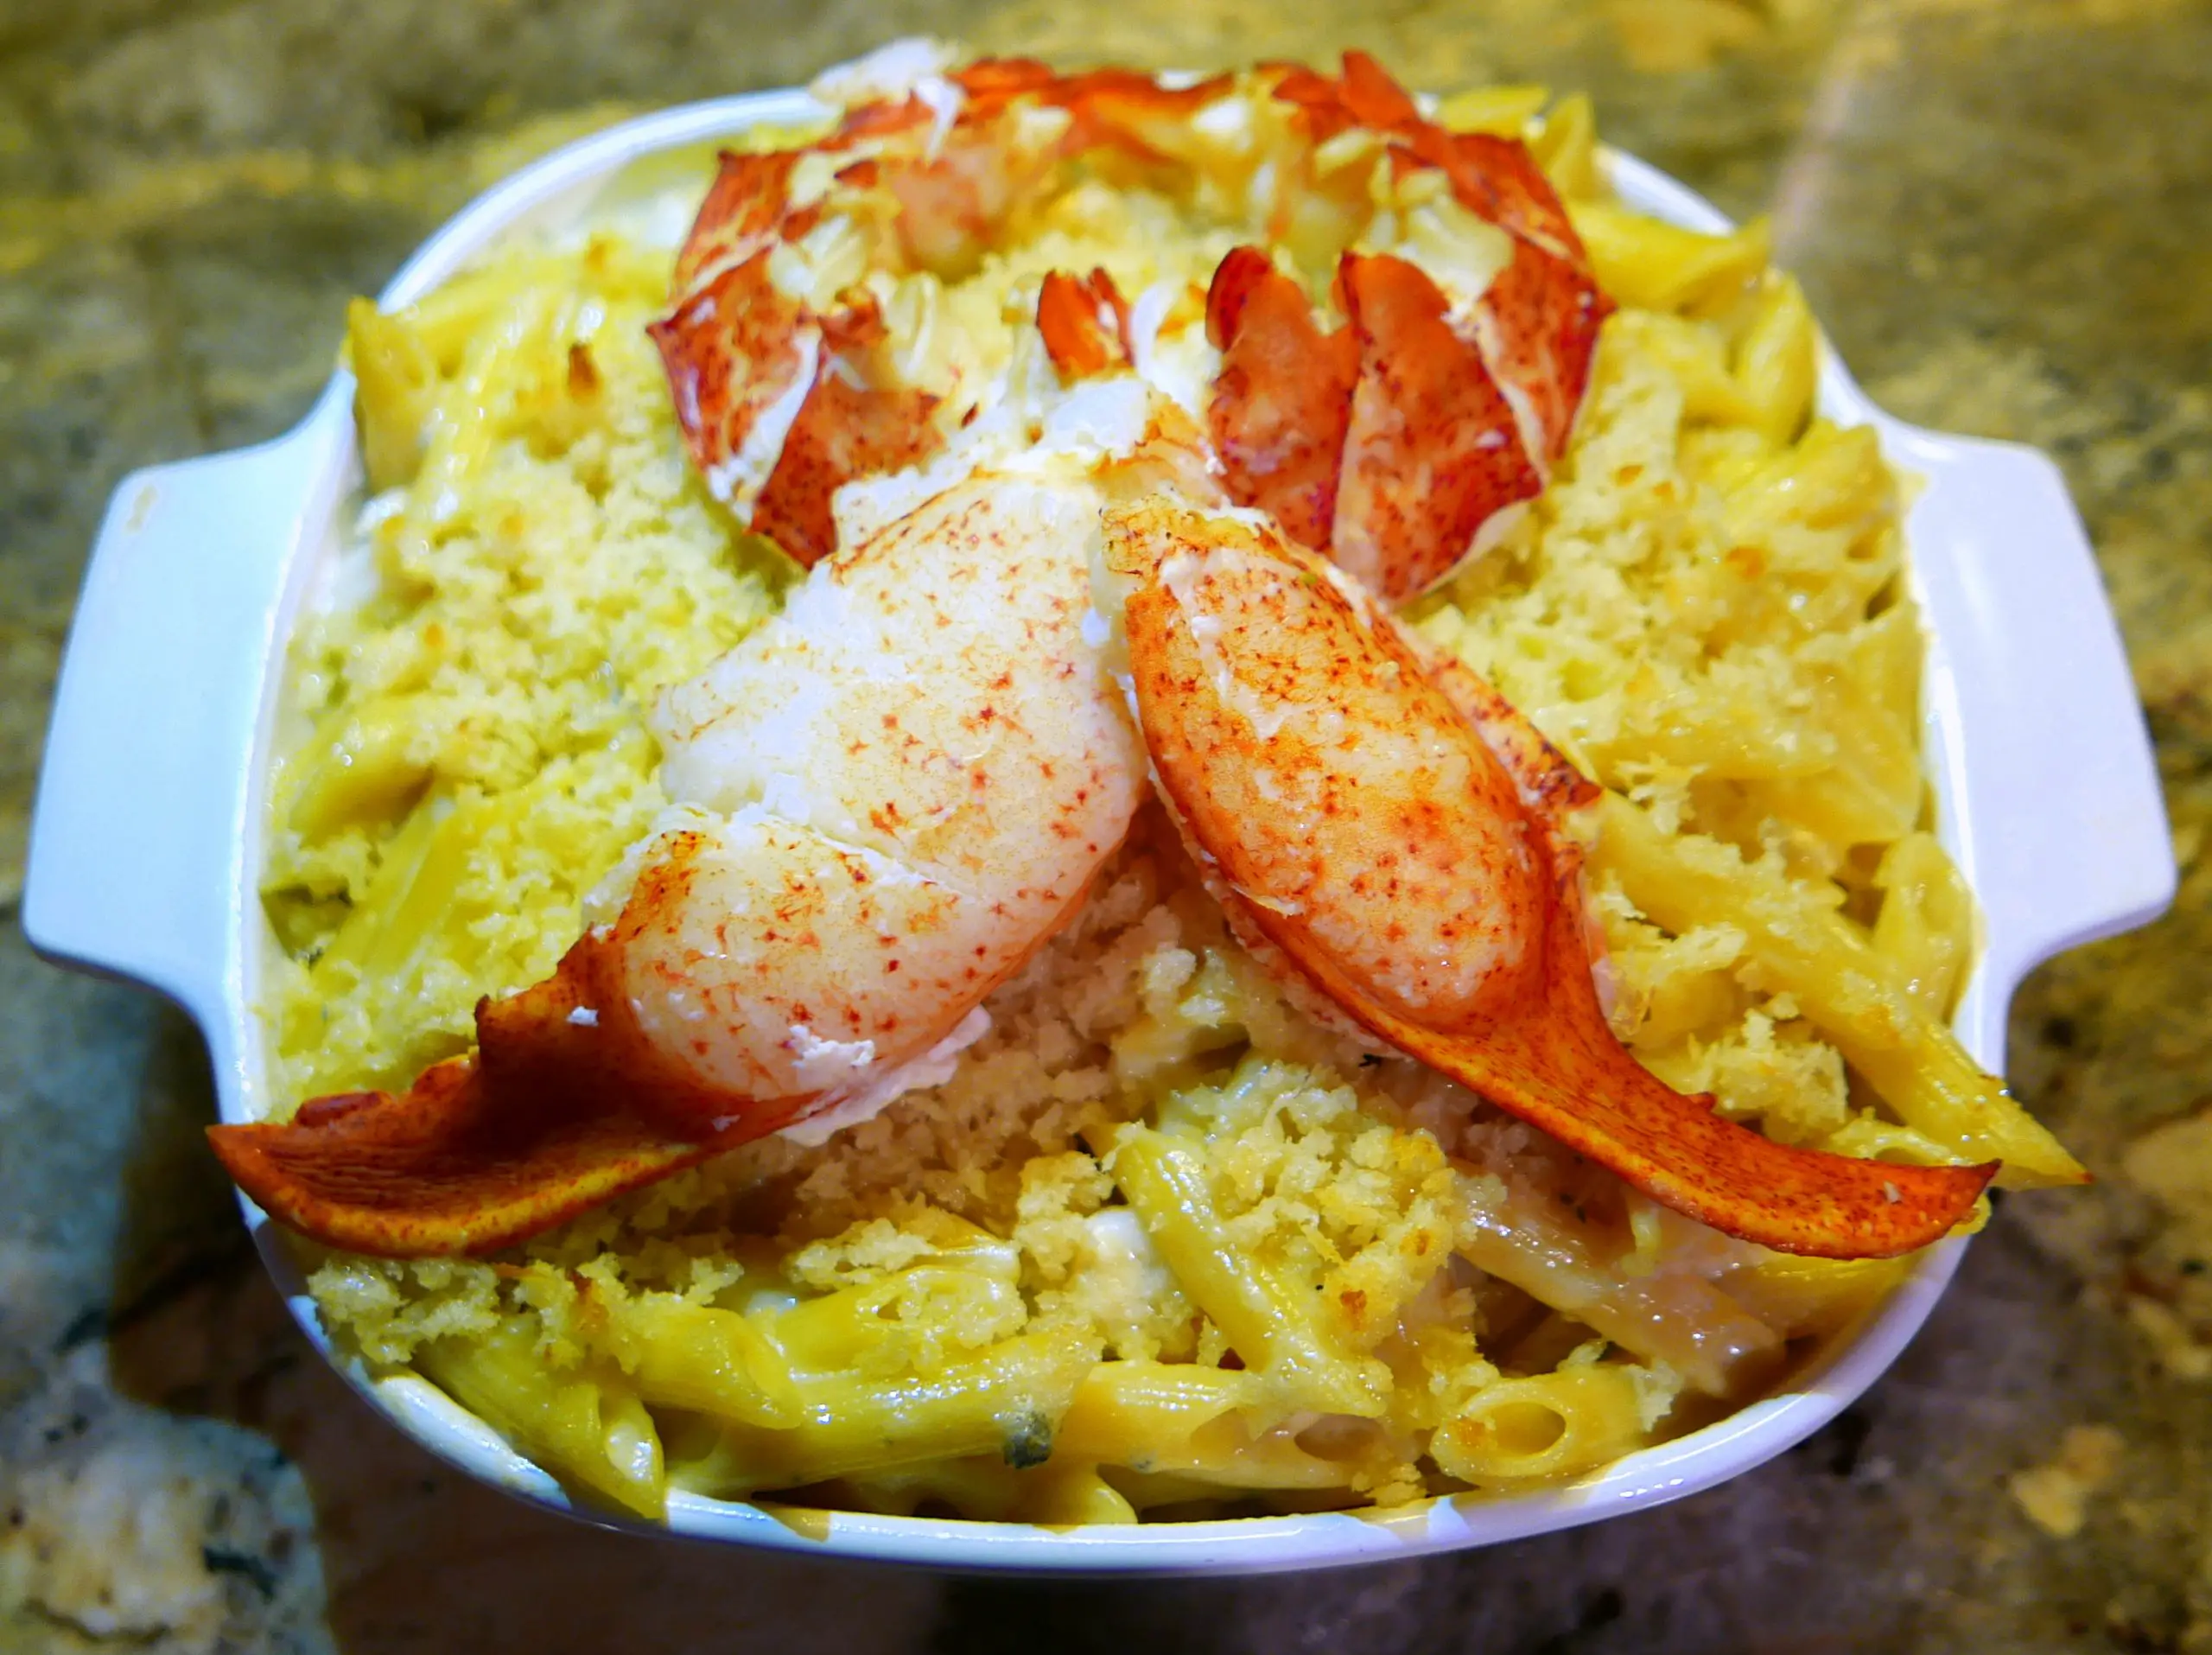 RECIPE: Lobster Mac and Cheese